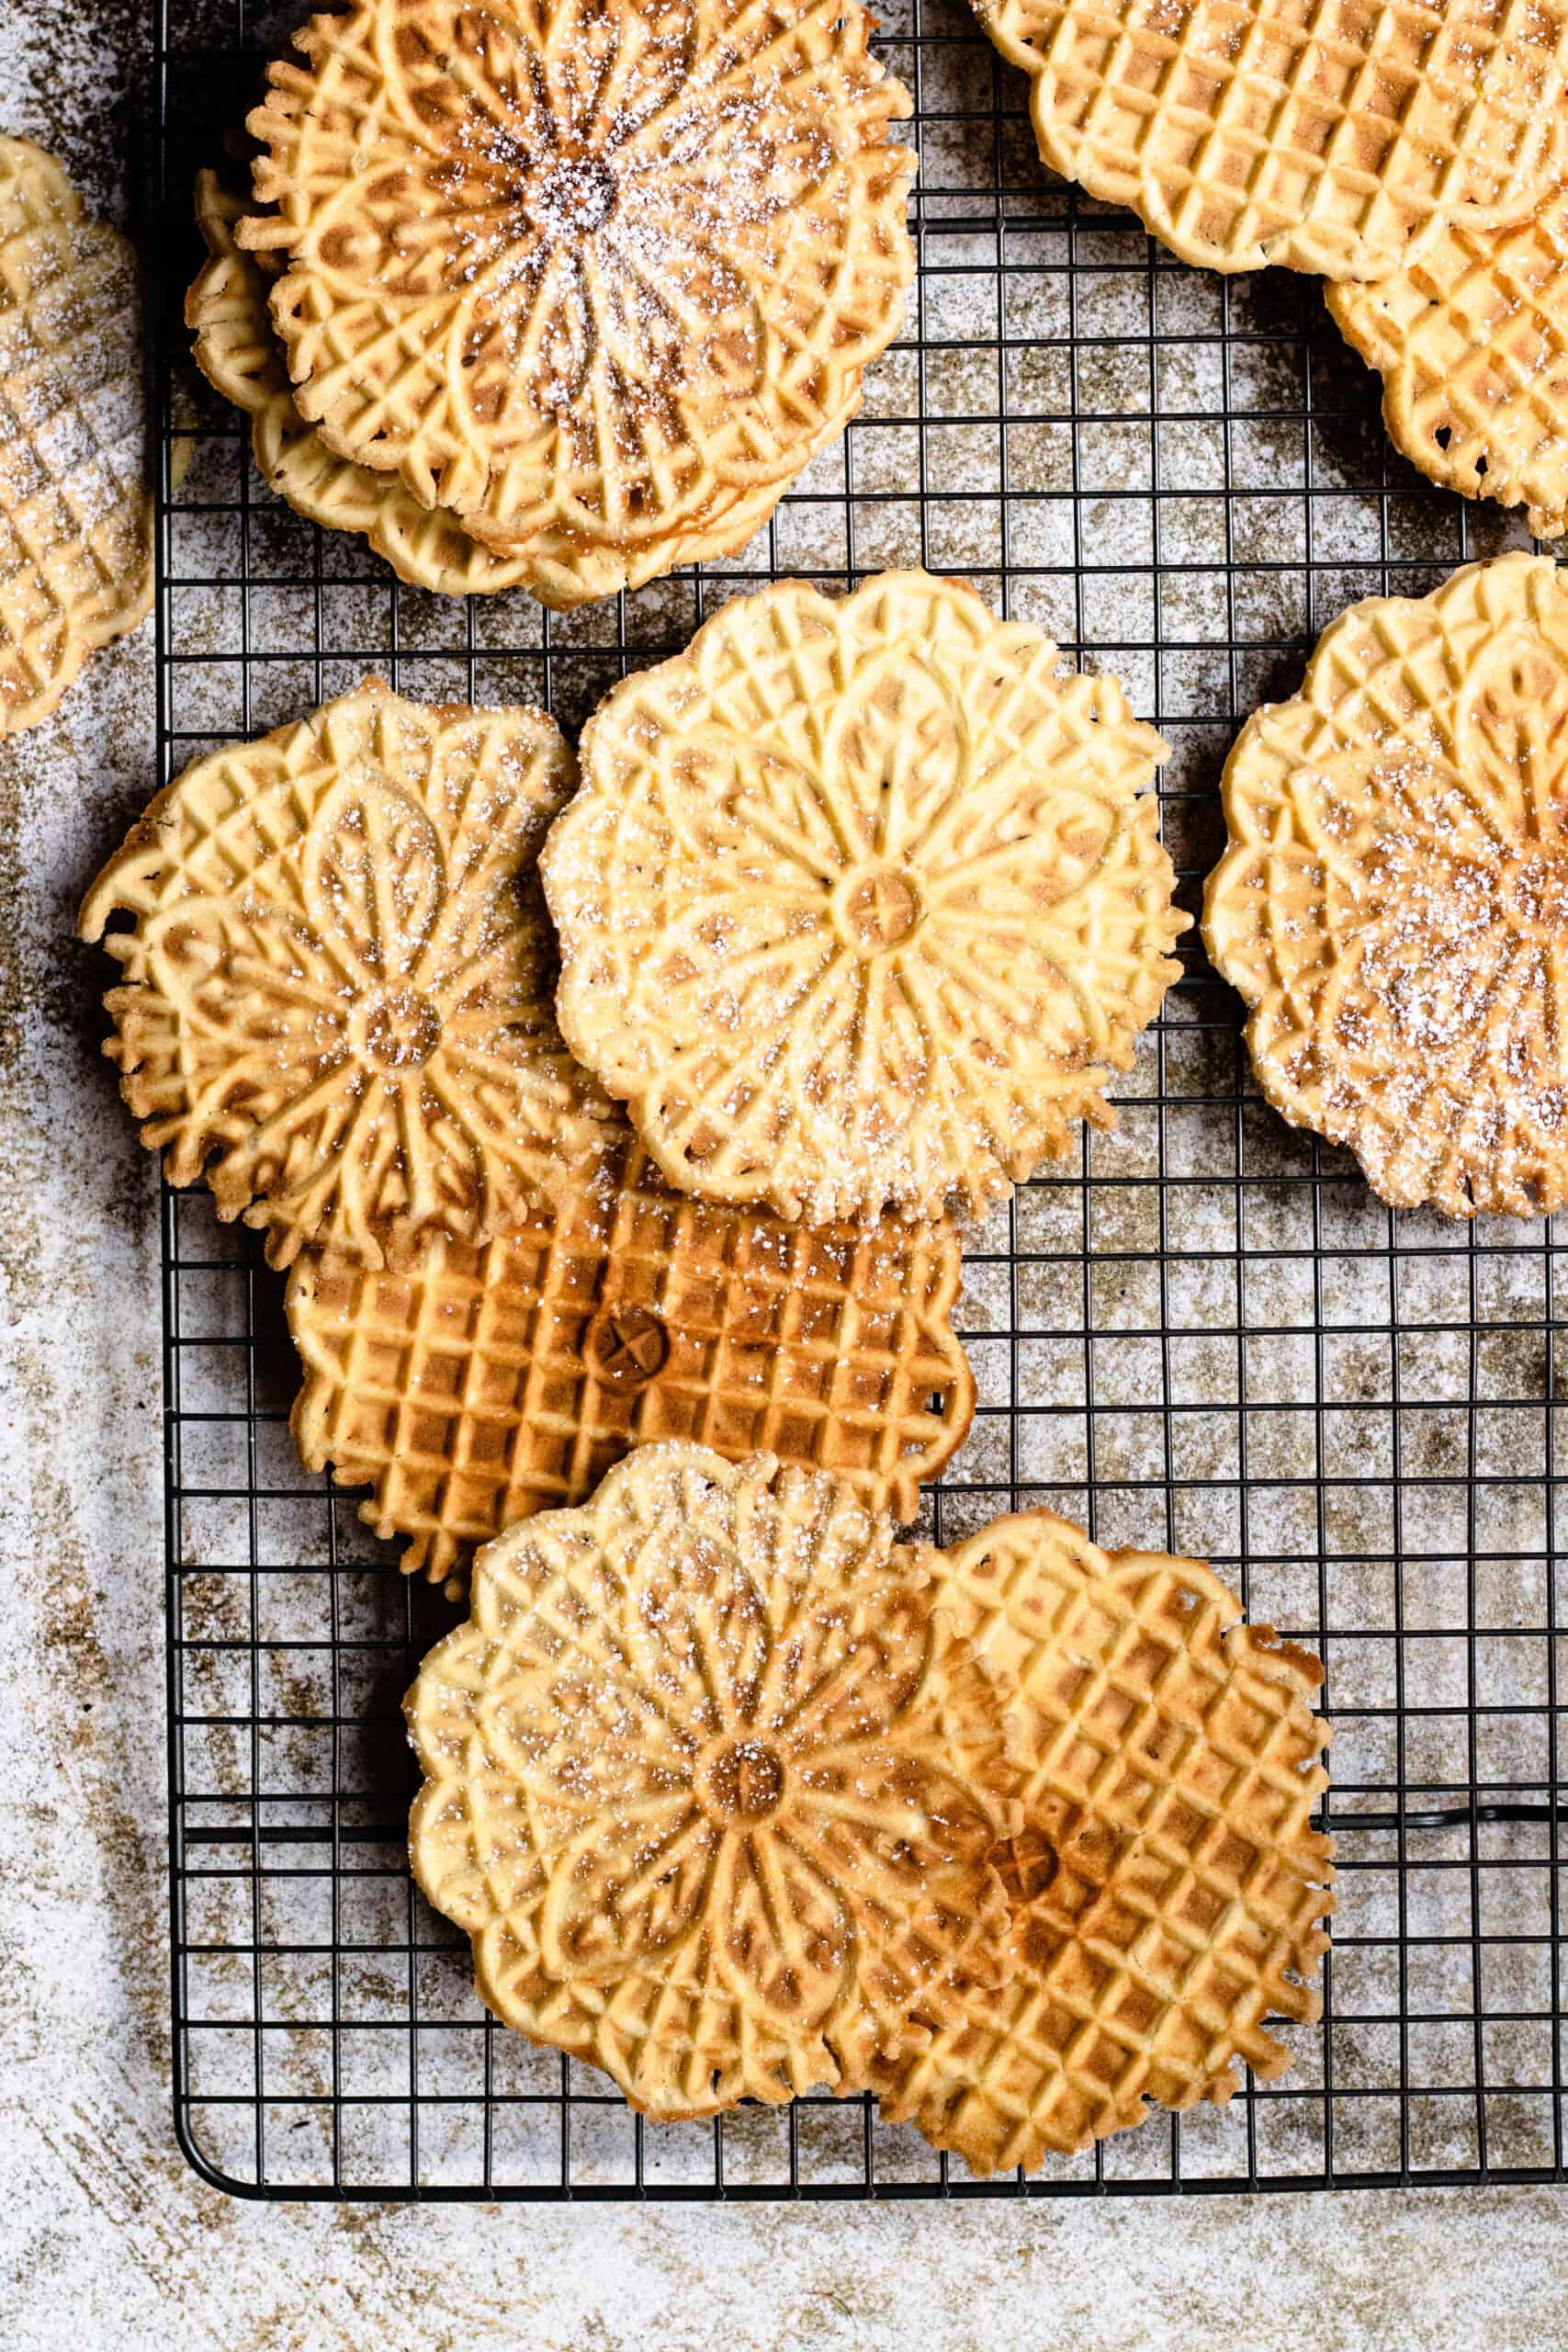 Pizzelles, Italian dessert recipe, laying on wire rack, some dusted with powdered sugar.